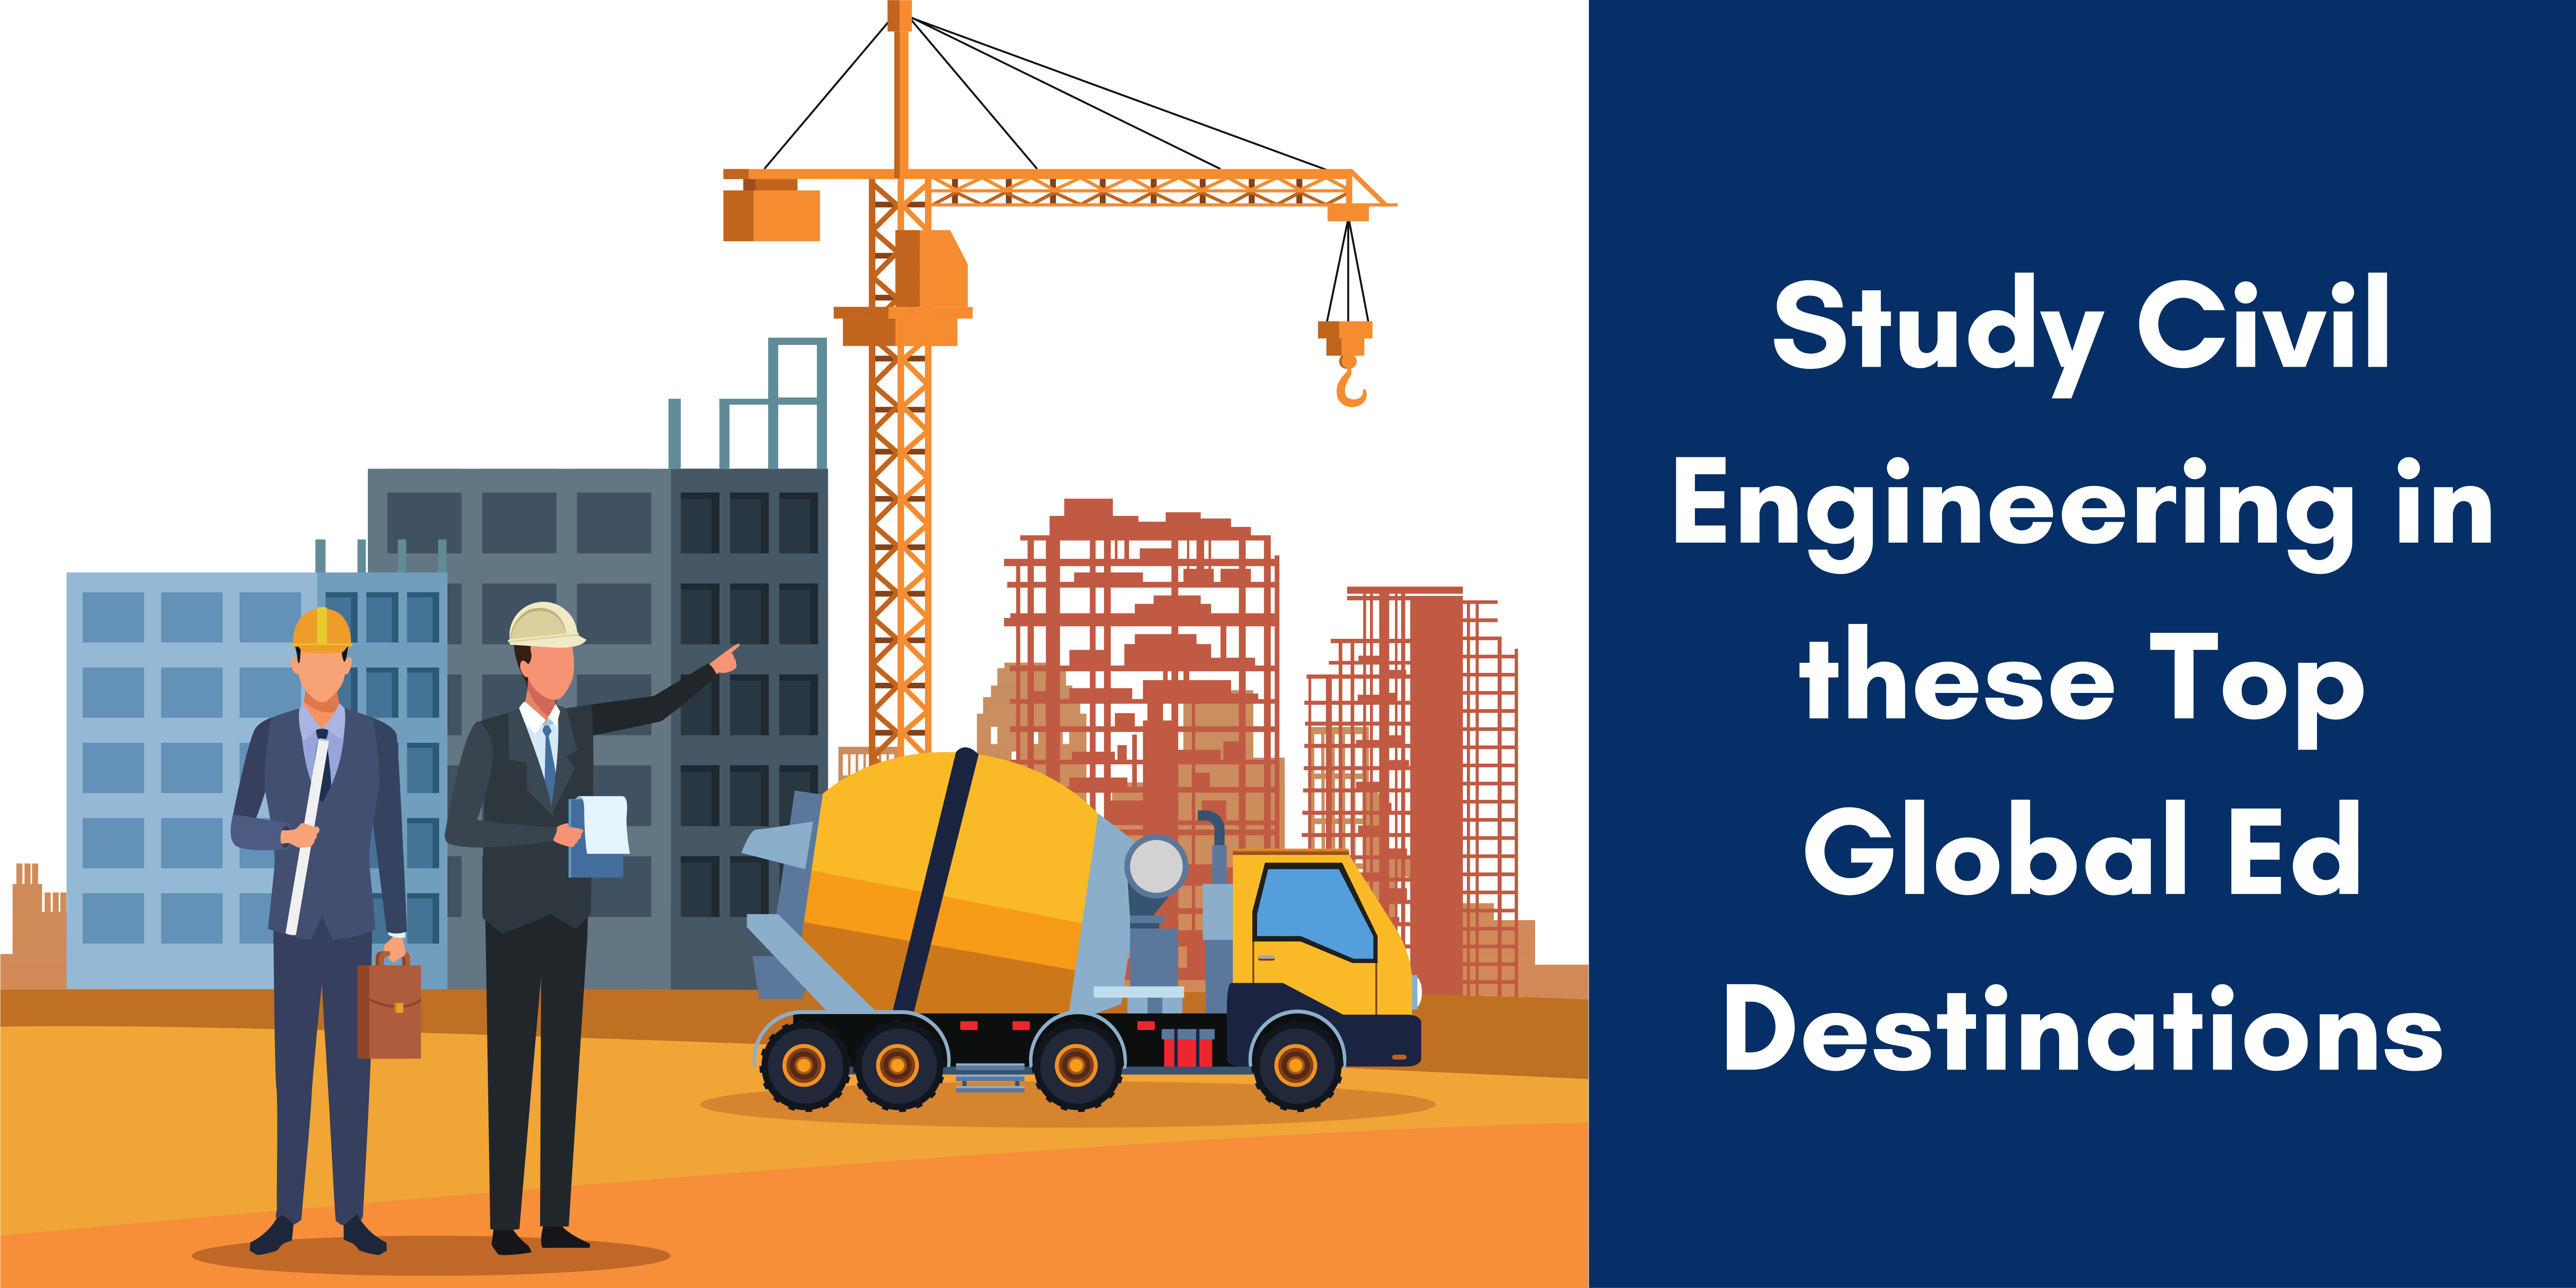 Study Civil Engineering in these Top Global Ed Destinations